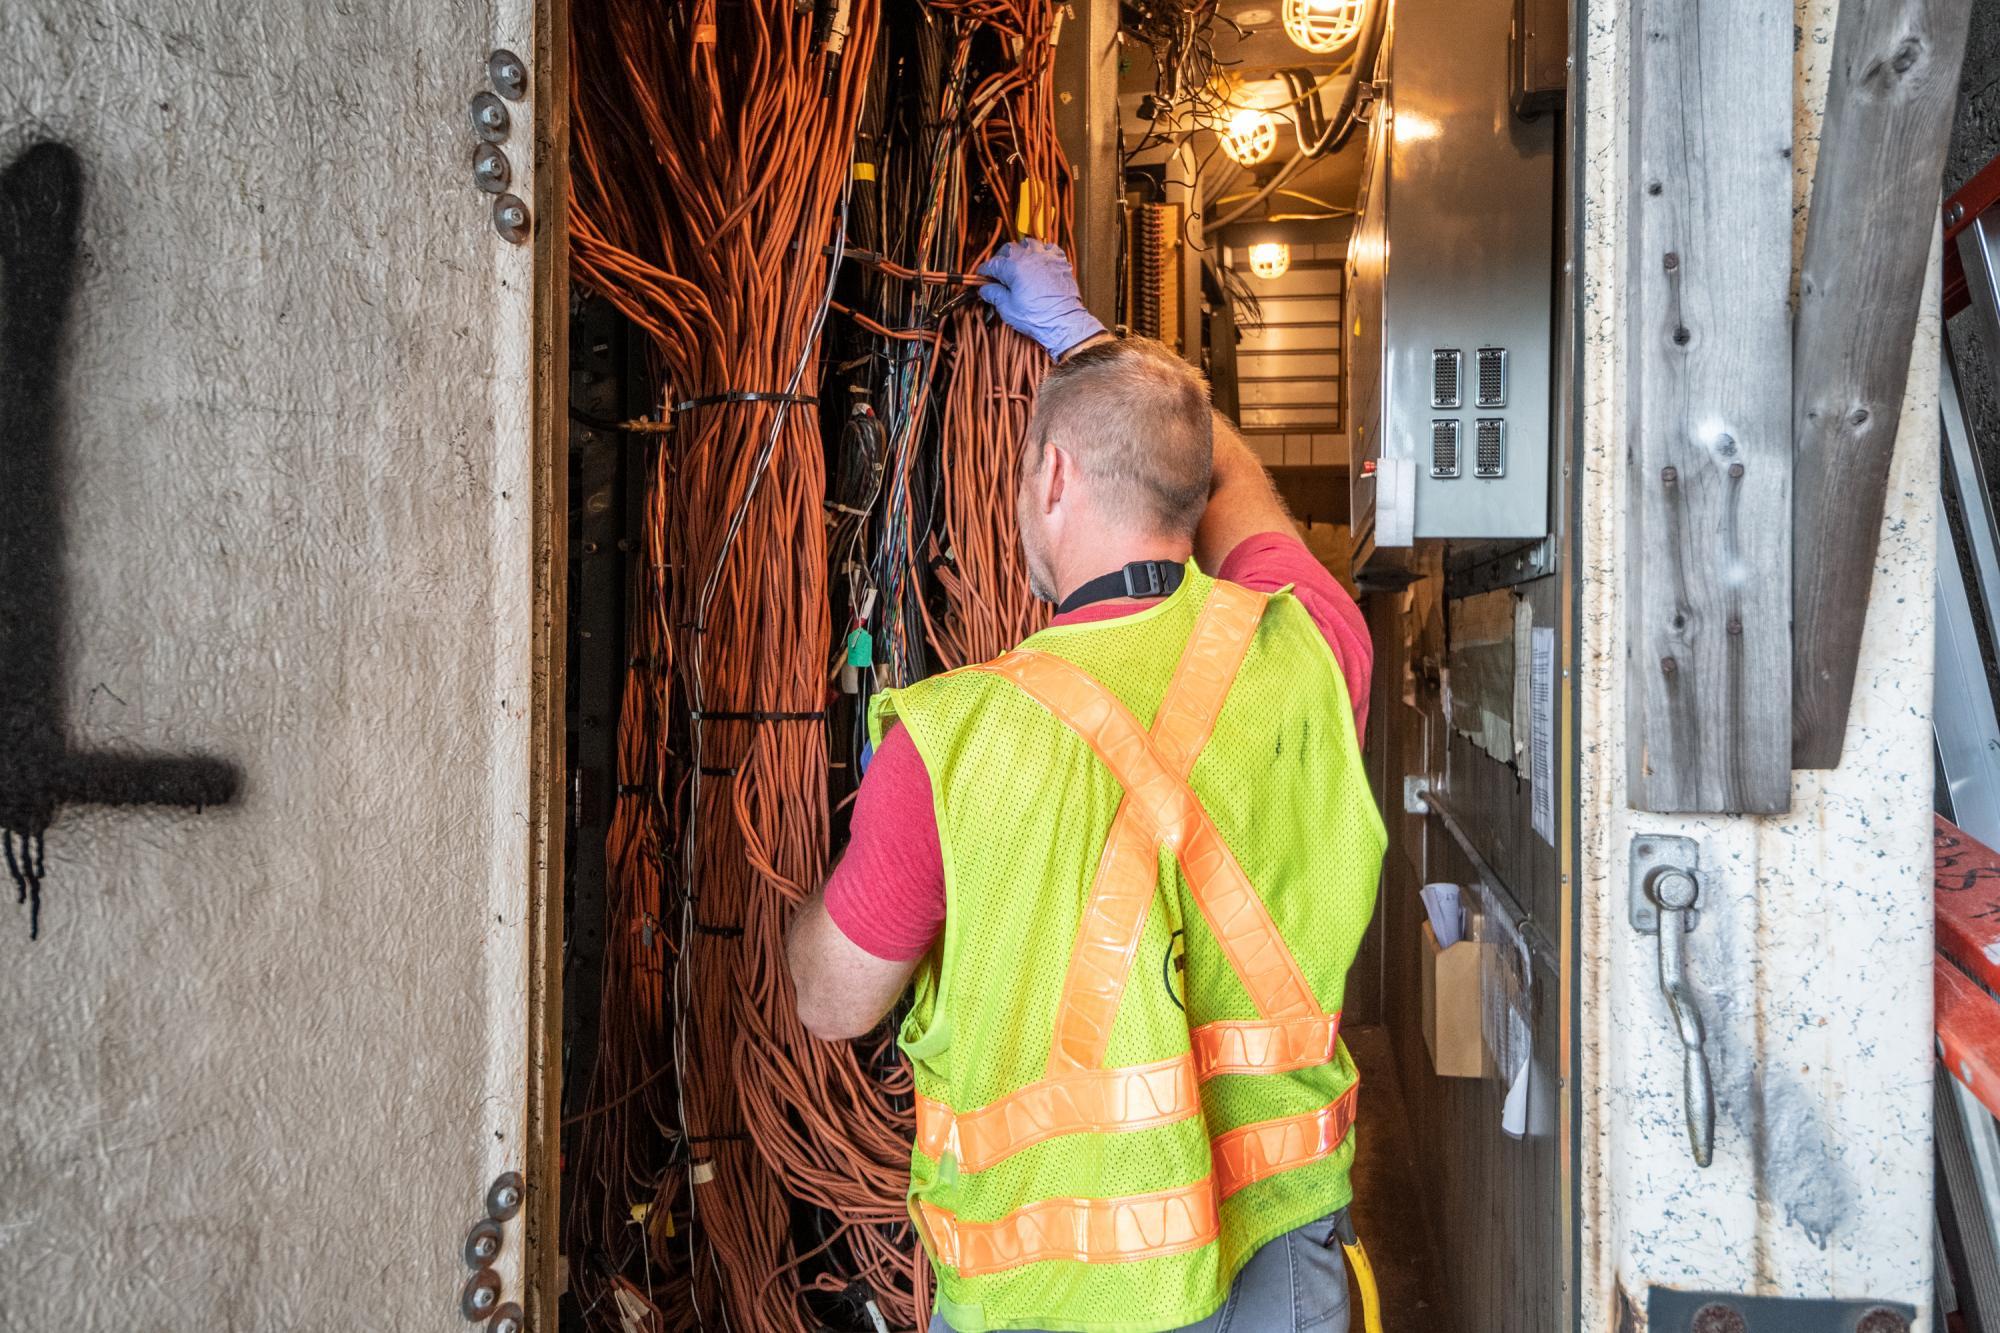 A worker in a neon vest handles wiring during signal repair at the JFK/UMass signals bungalow.